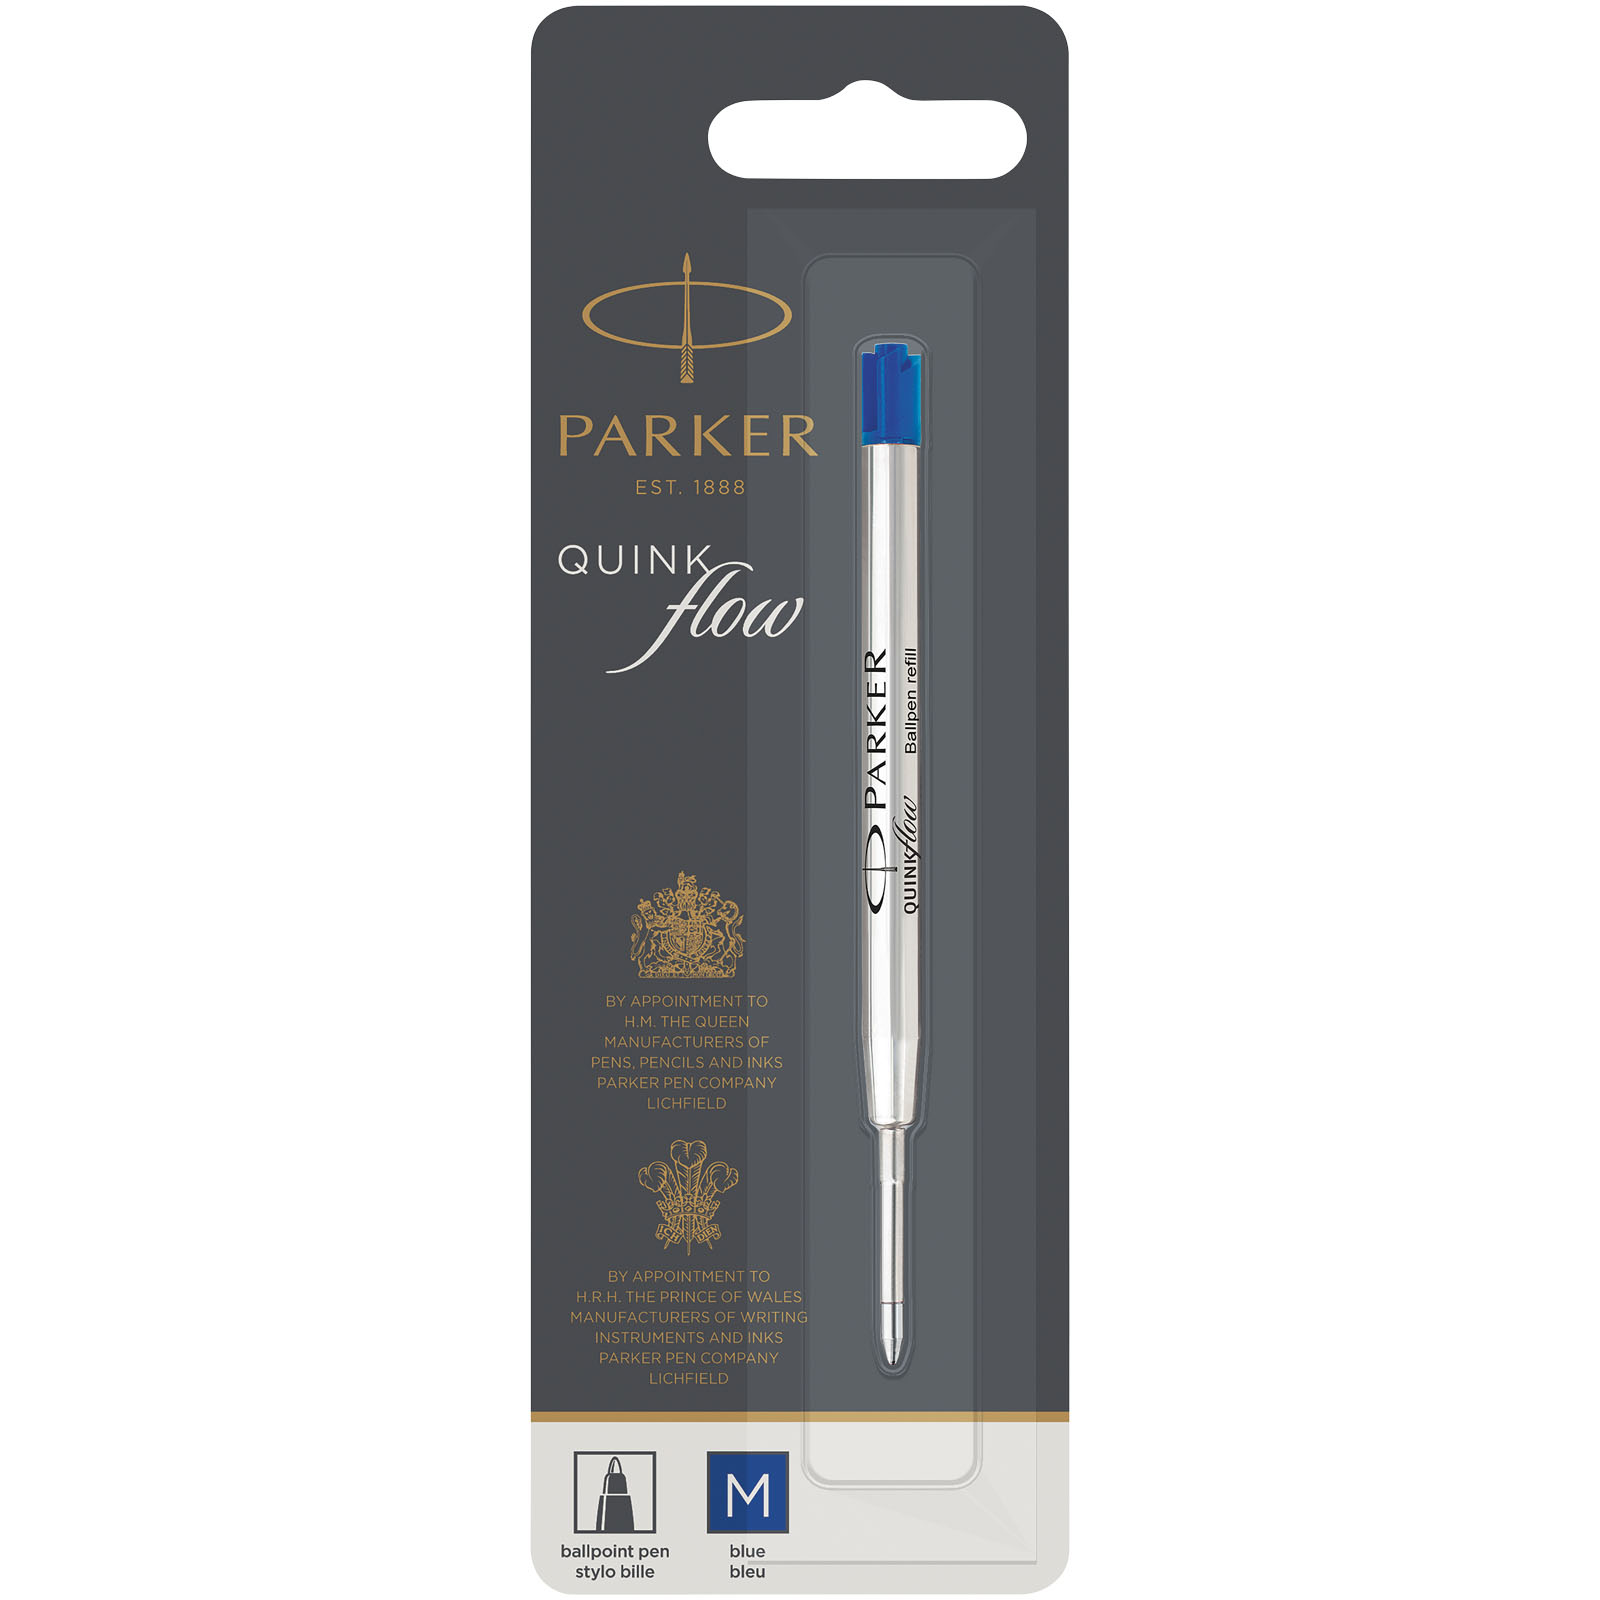 Other Pens & Writing Accessories - Parker Quinkflow ballpoint pen refill